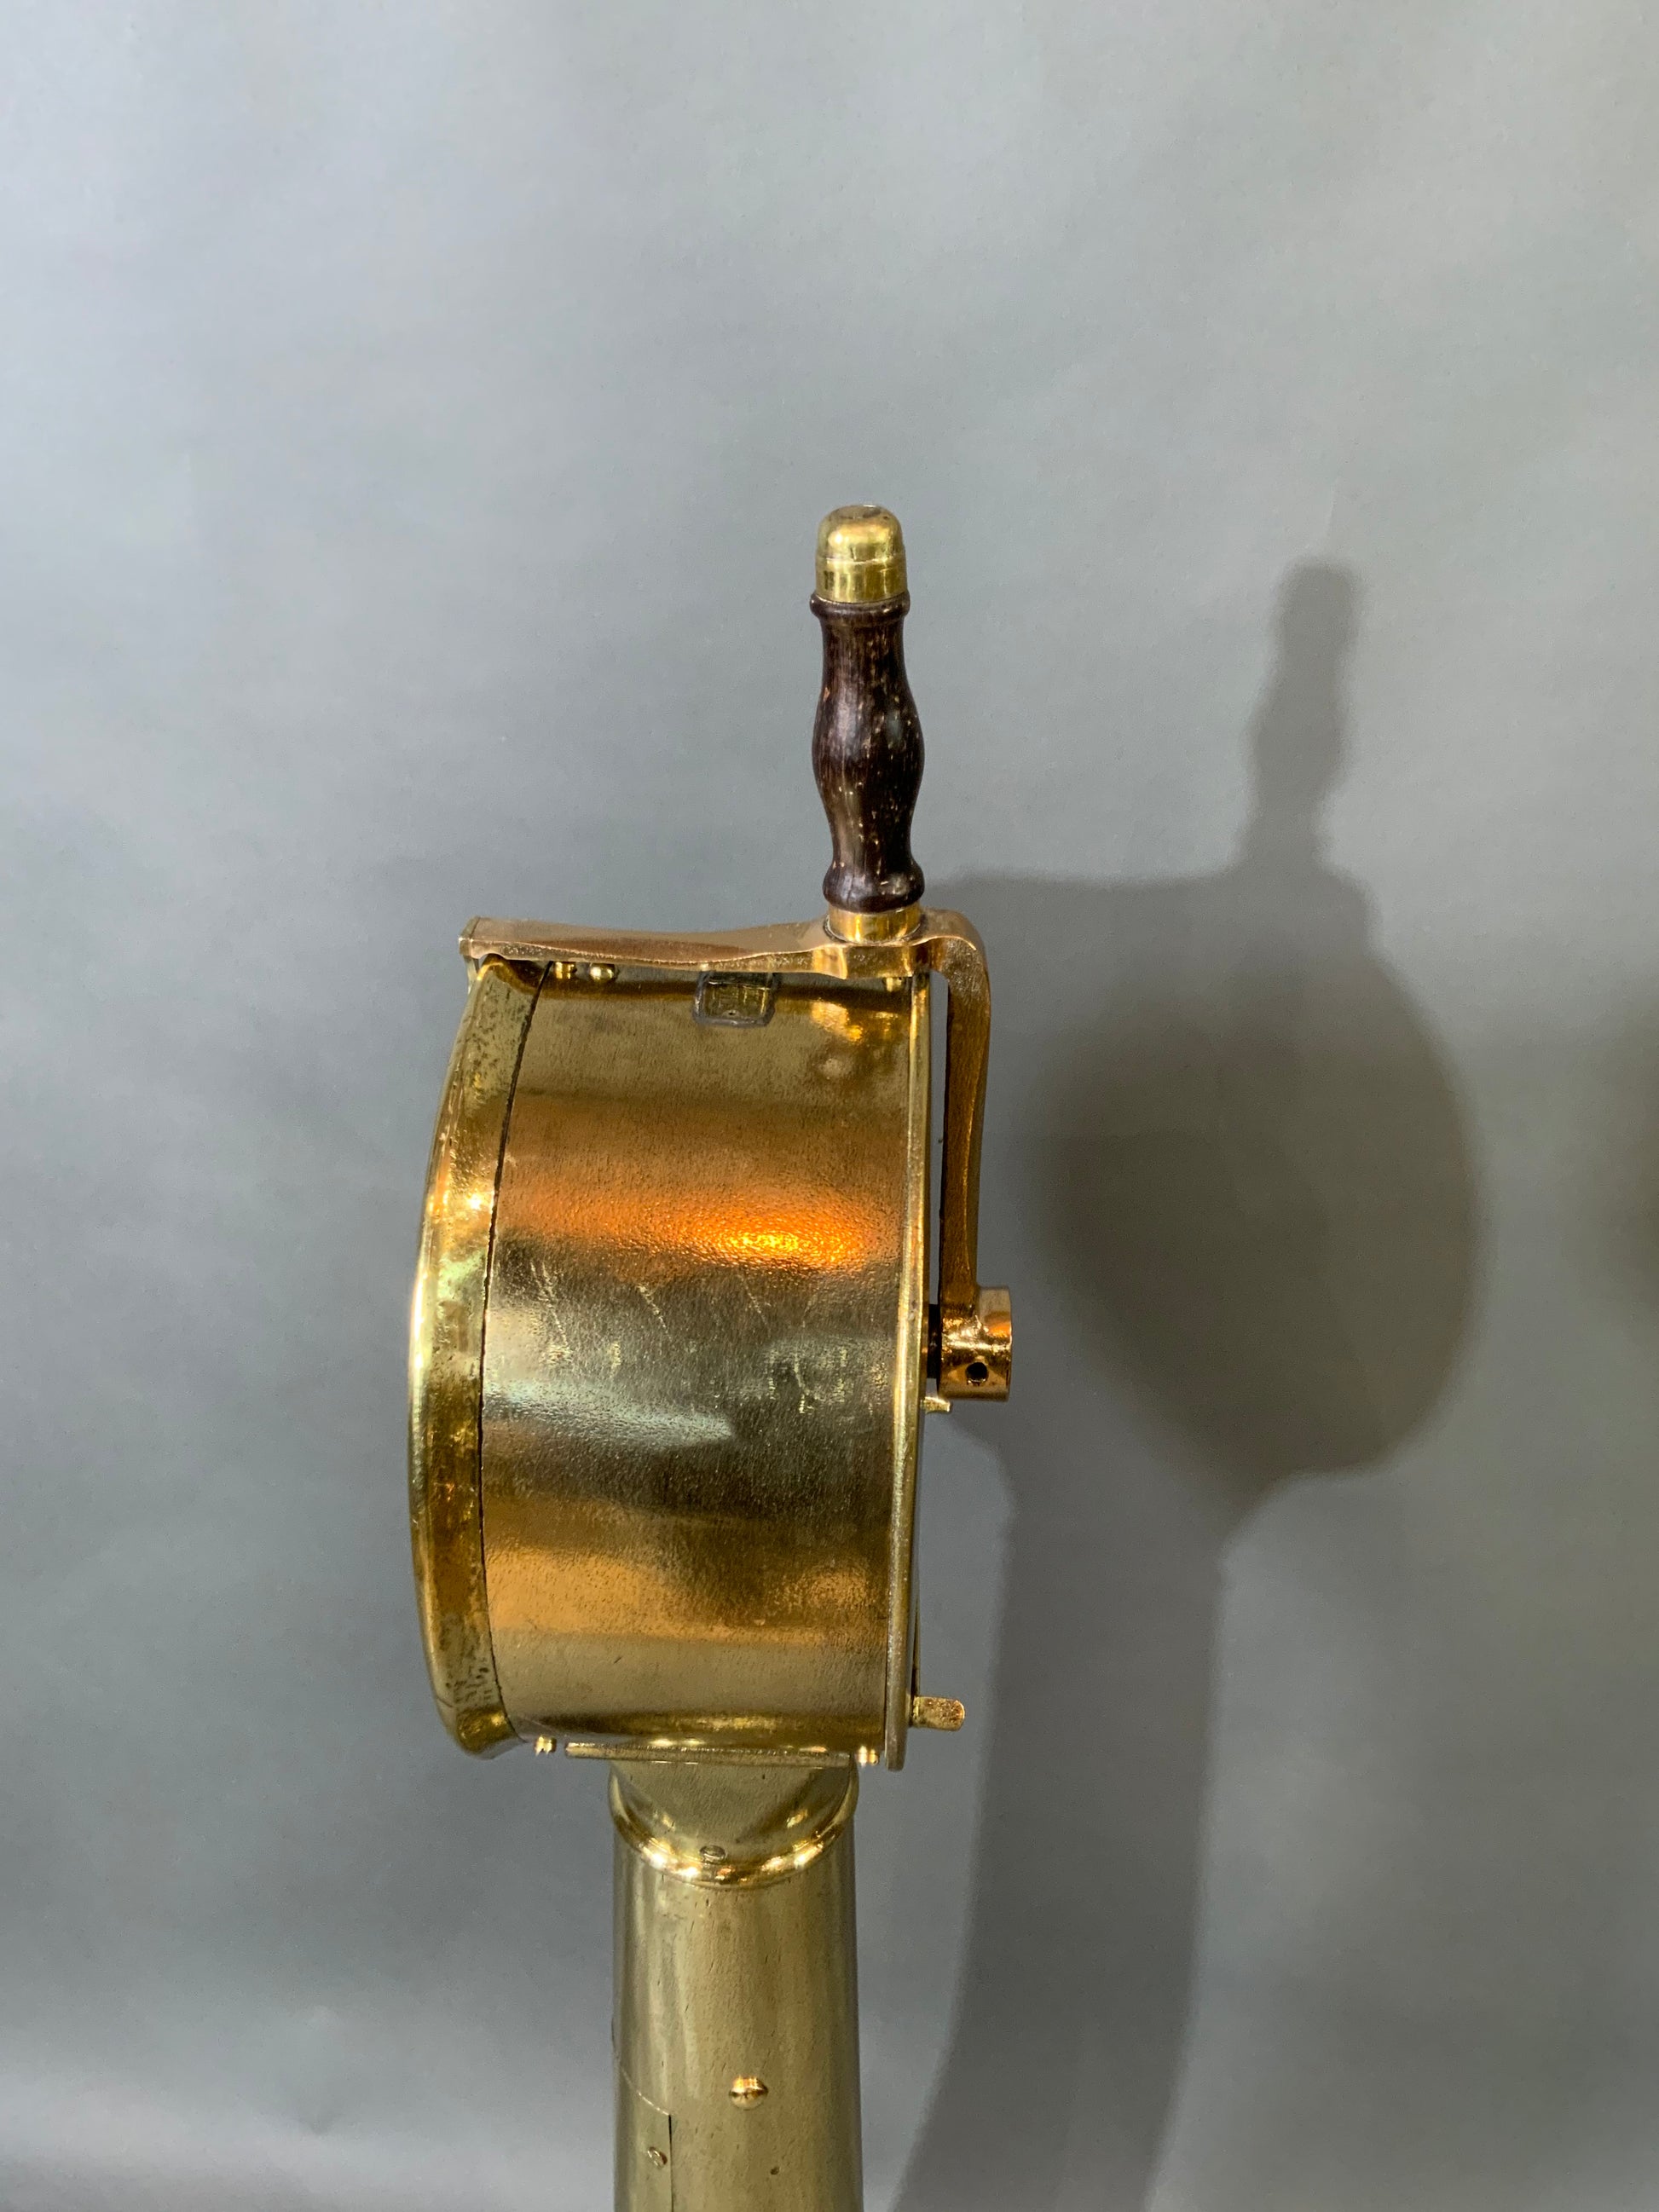 Engine Order Telegraph from a Yacht - Lannan Gallery